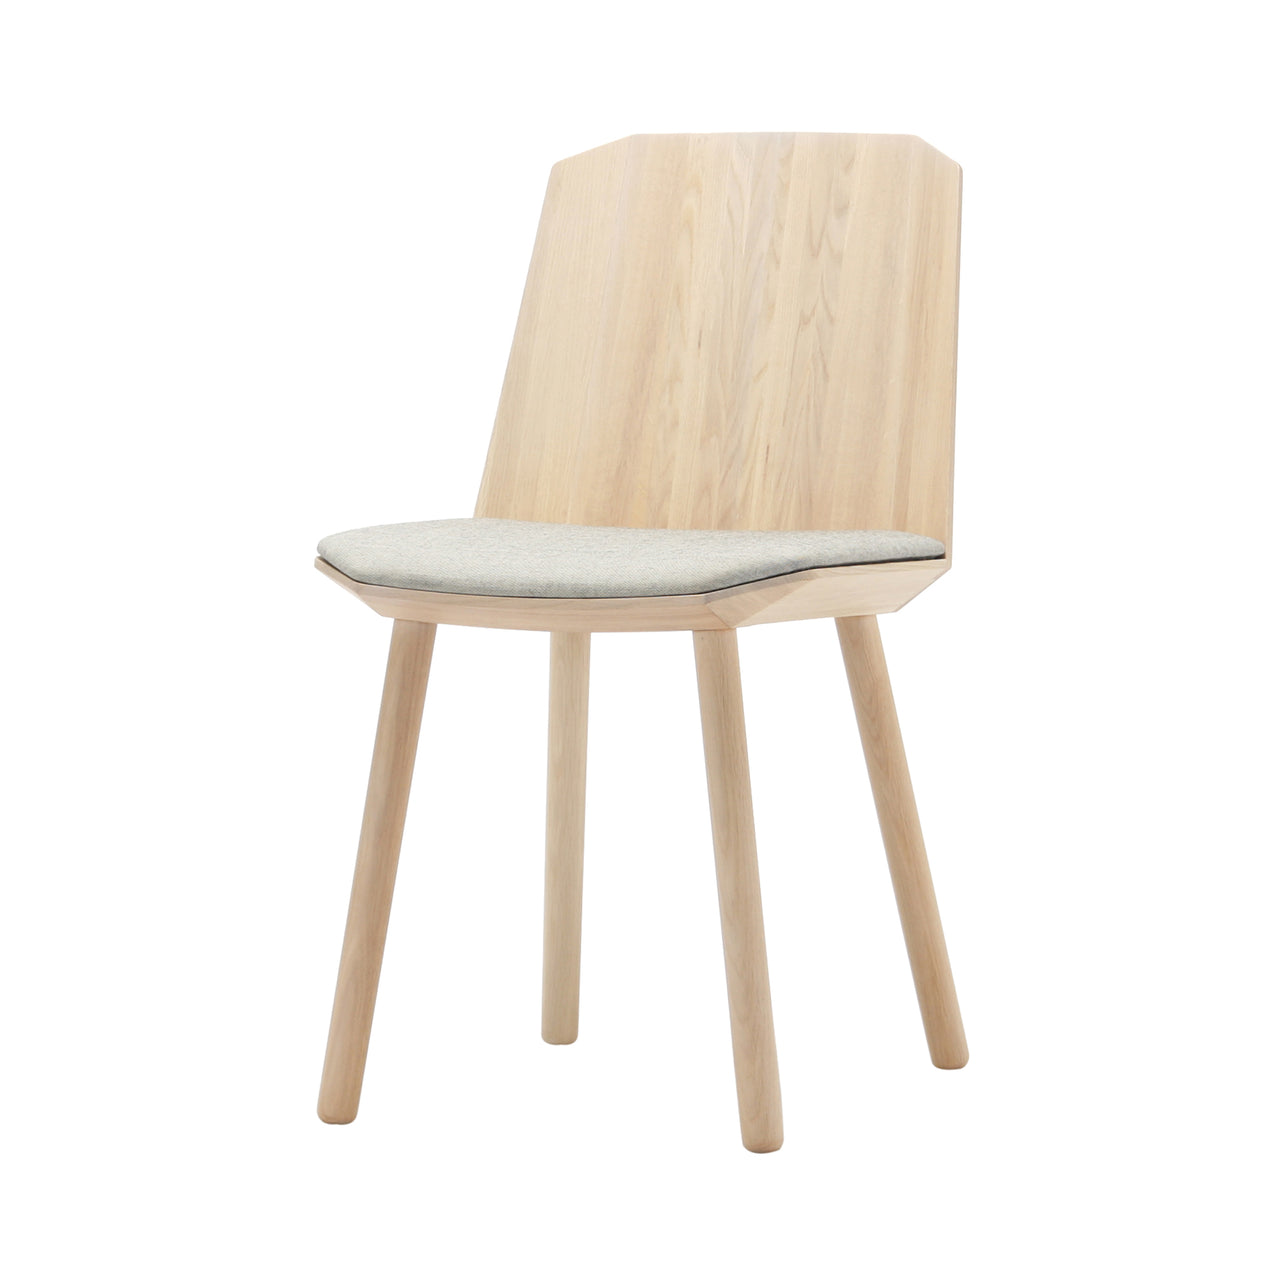 Colour Wood Side Chair: Pale Natural